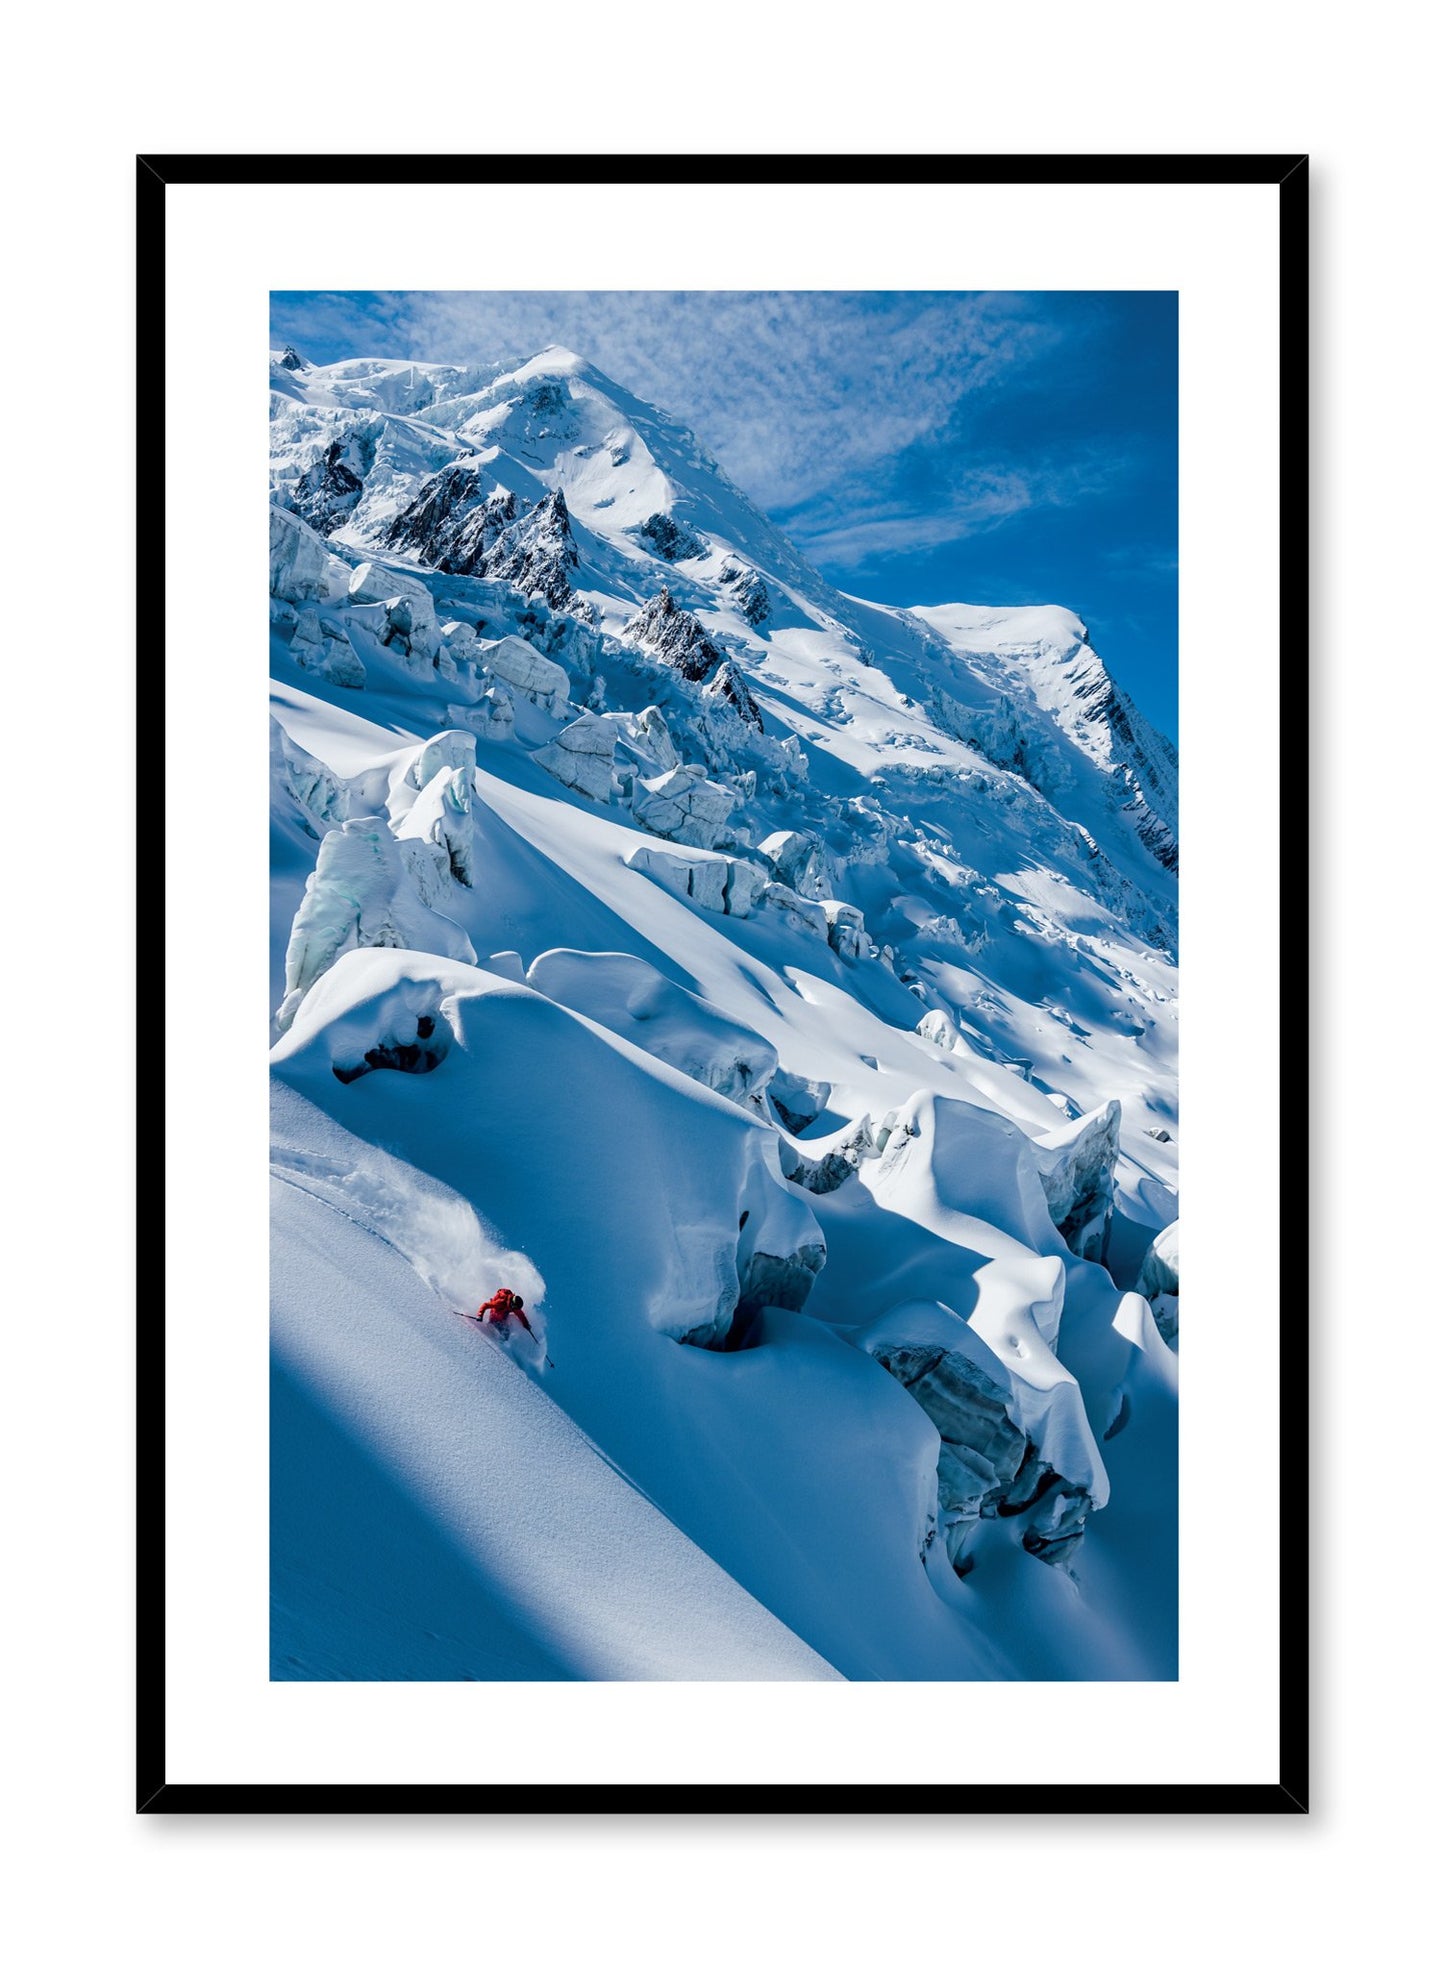 Landscape photography poster by Opposite Wall with snowy mountain peaks